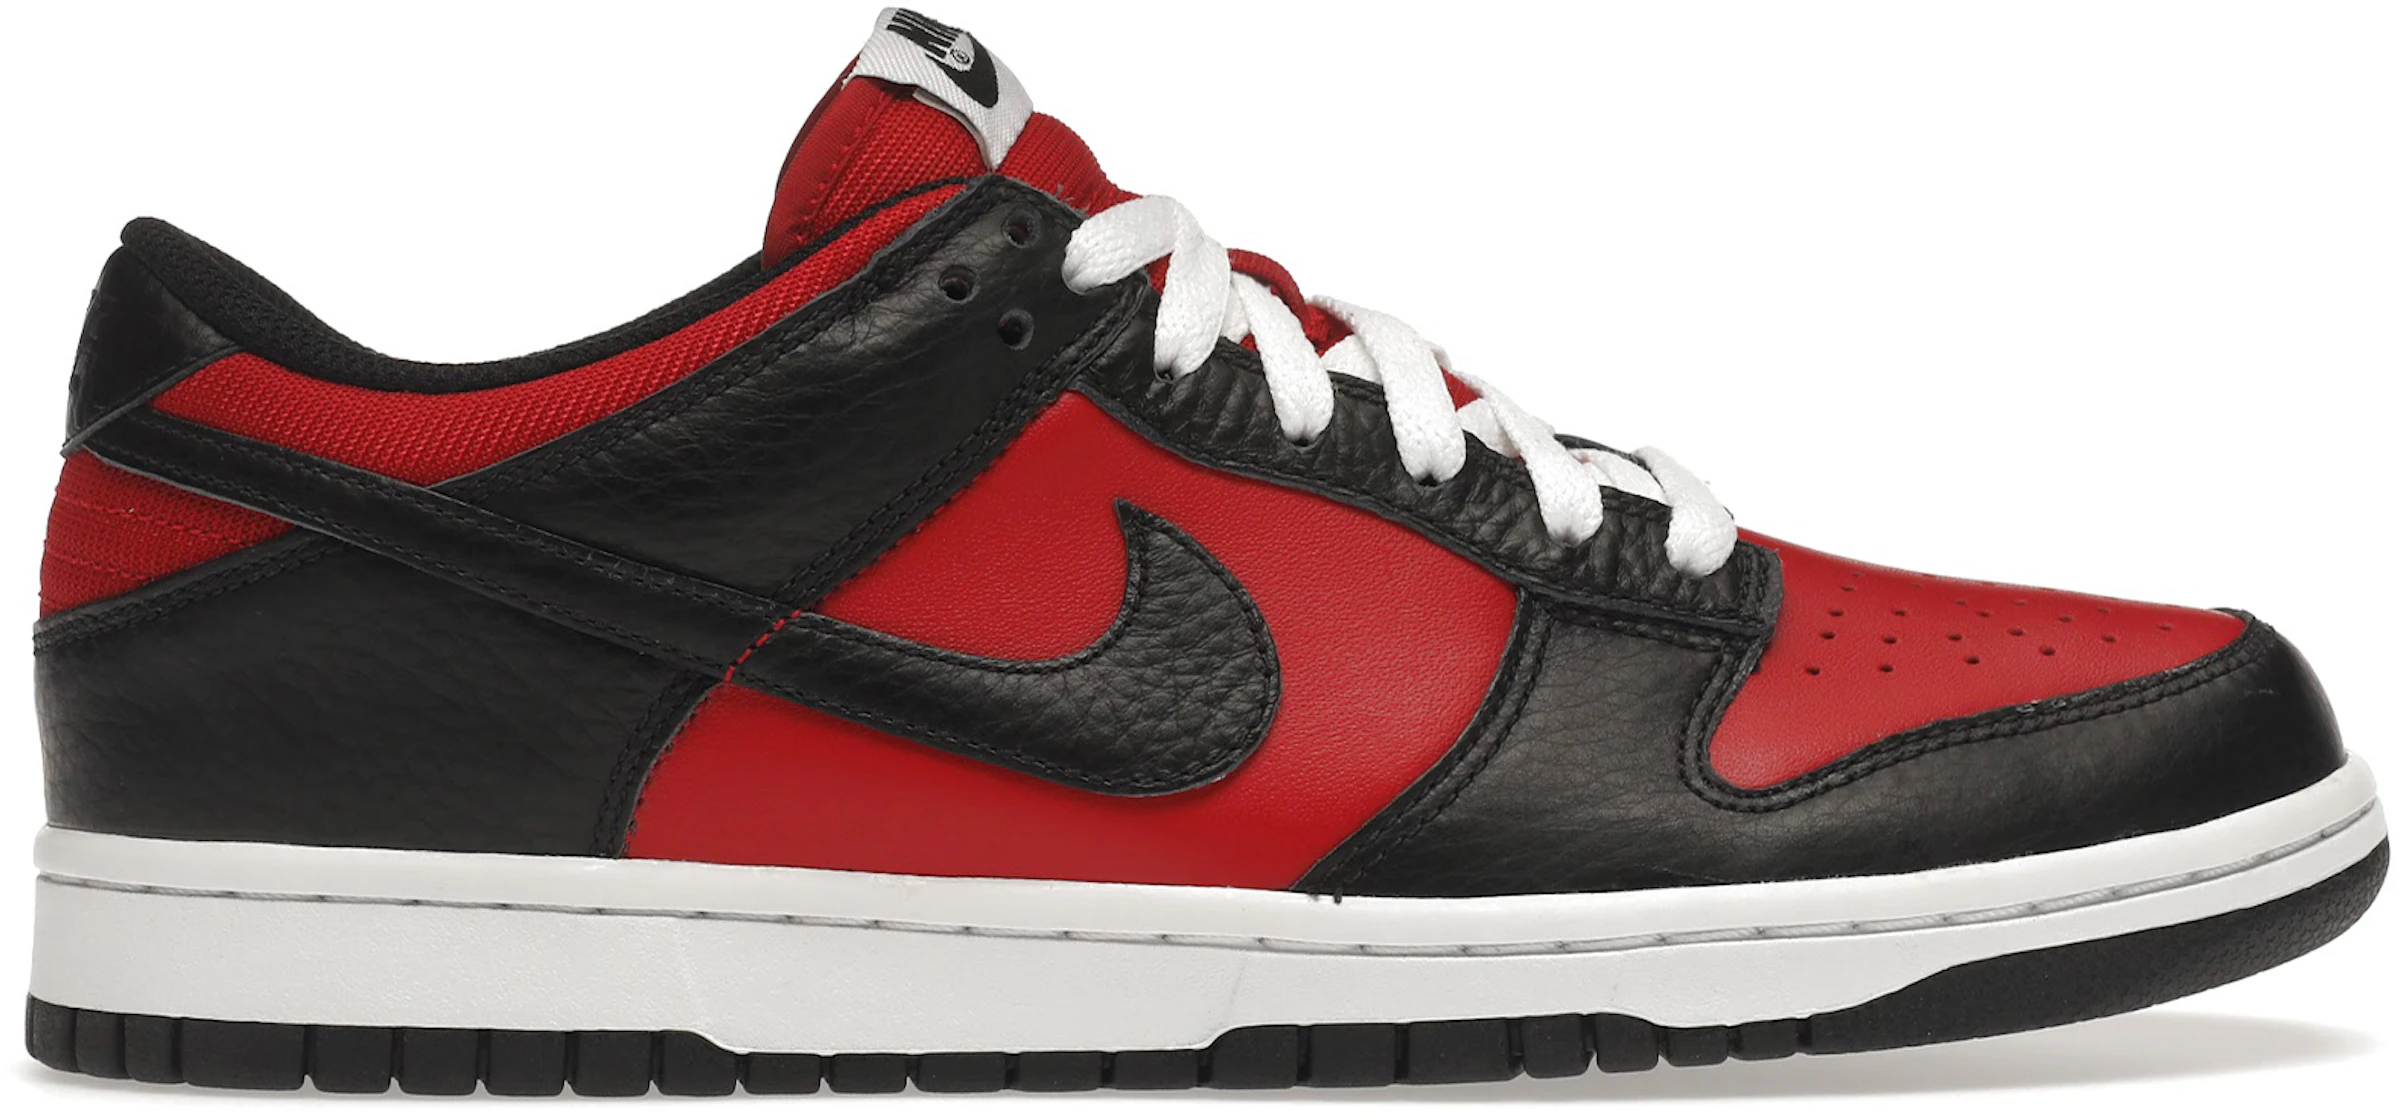 Nike Dunk Red and Black: Bold and Eye-Catching Sneakers in Red and Black Colorway